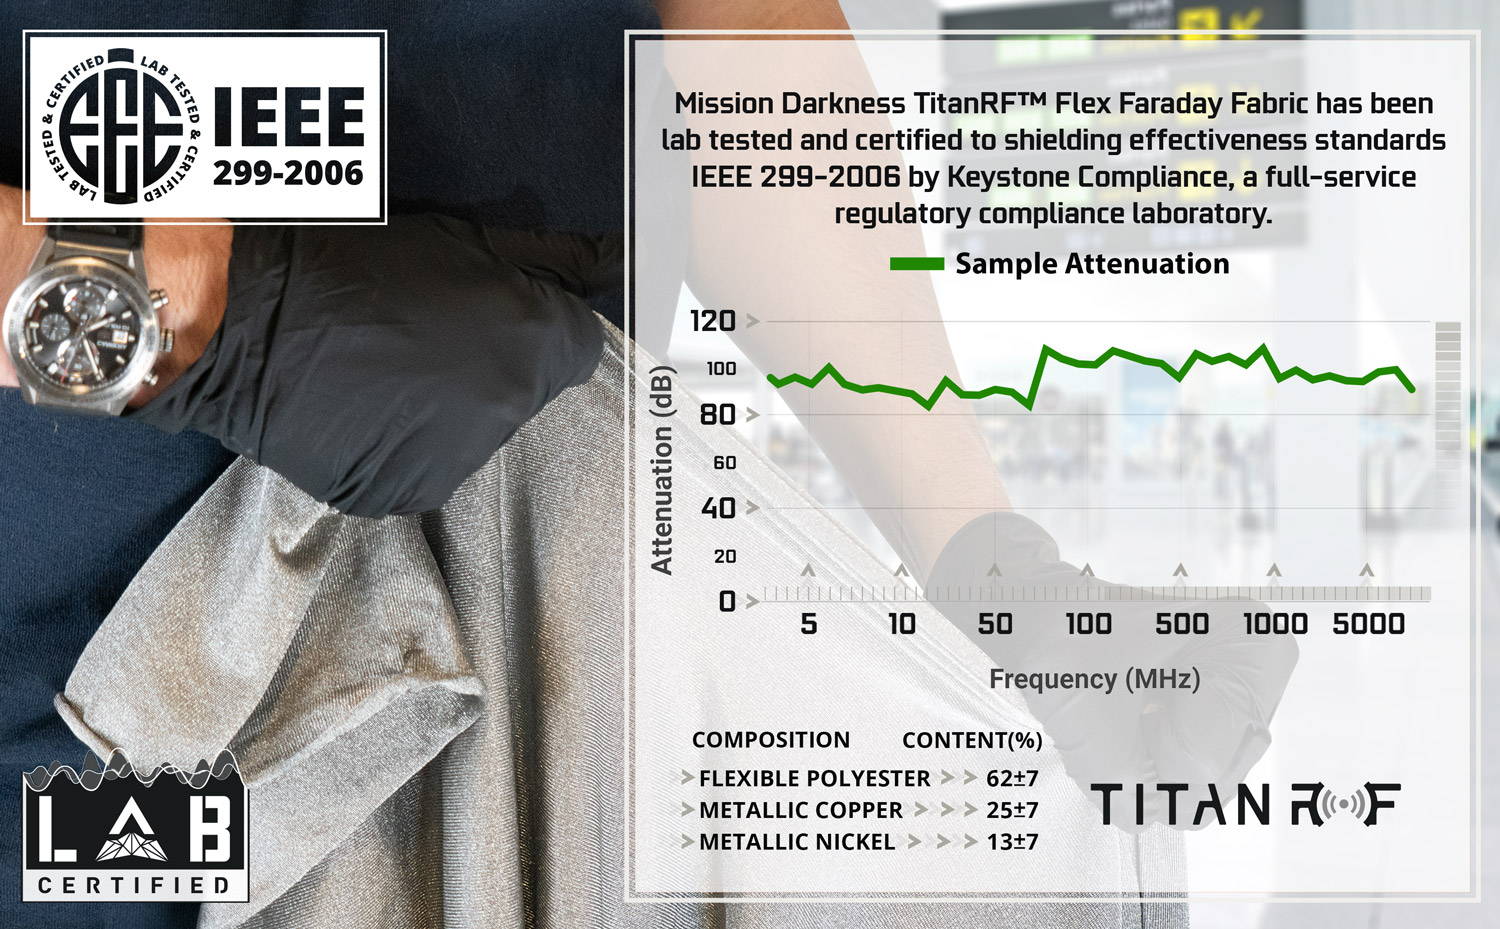 IEEE 299-2006 lab tested and certified TitanRF™ Flex Faraday Fabric used in the Mission Darkness™ EMF Blackout Beanie